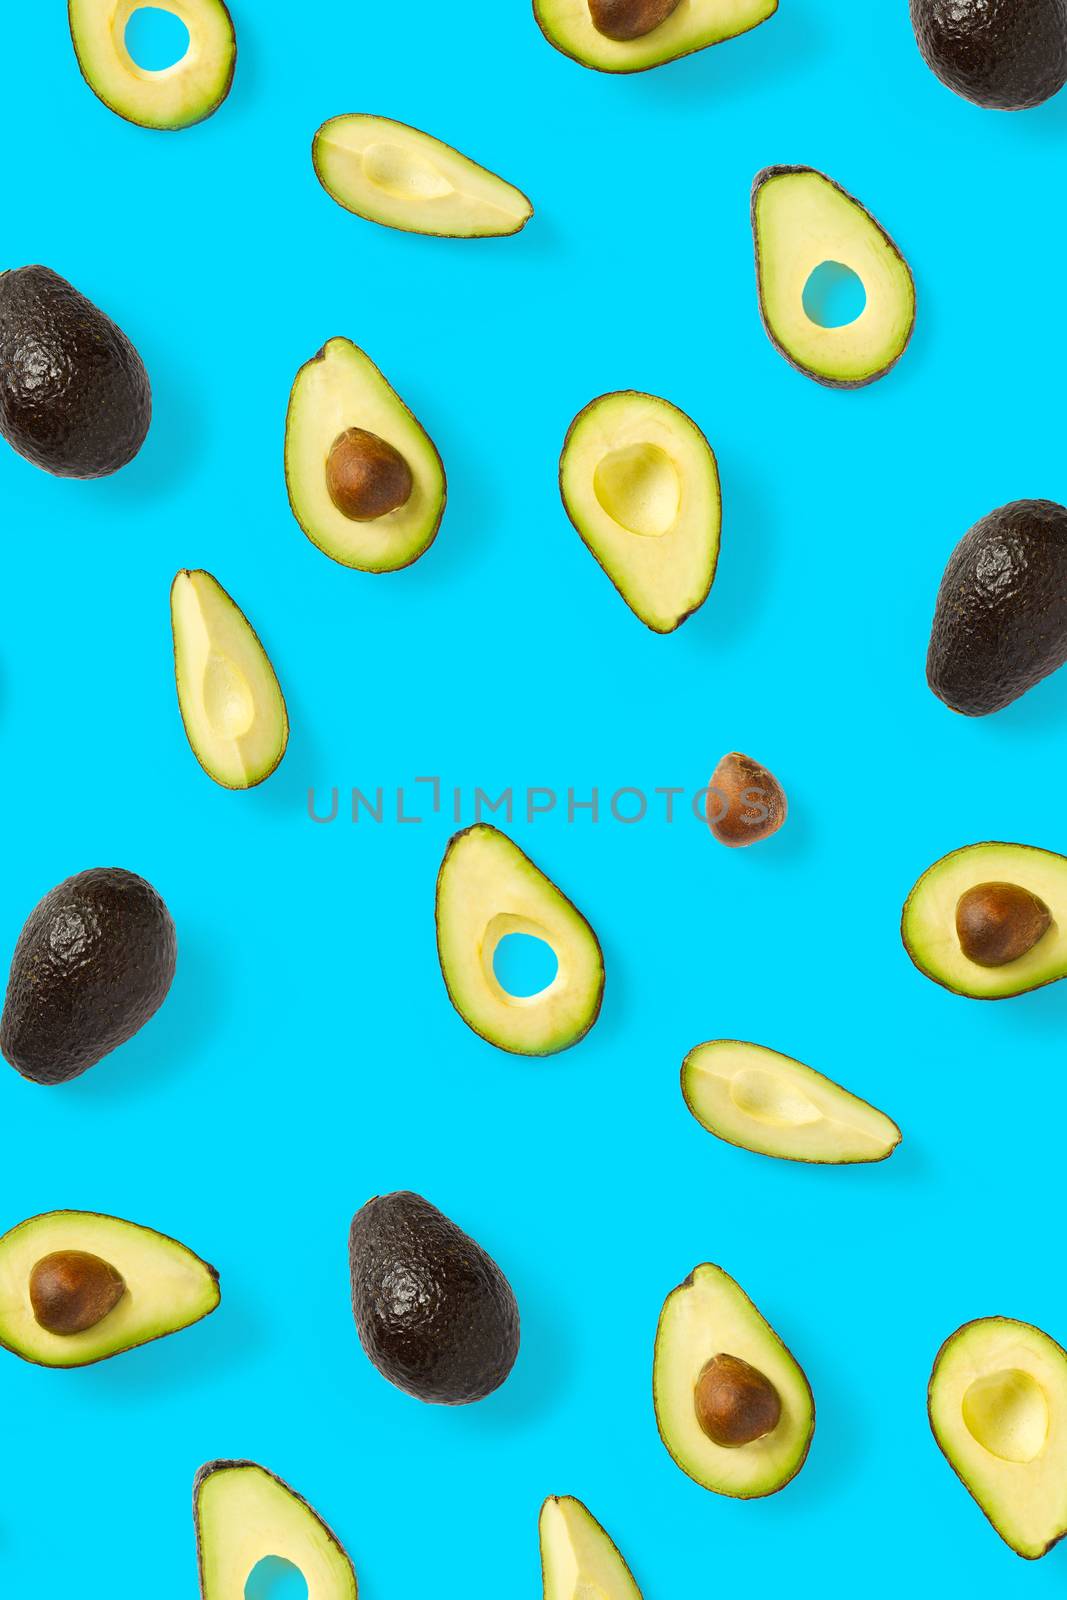 Avocado. Background made from isolated Avocado pieces on blue background. Flat lay of fresh ripe avocados and avacado pieces